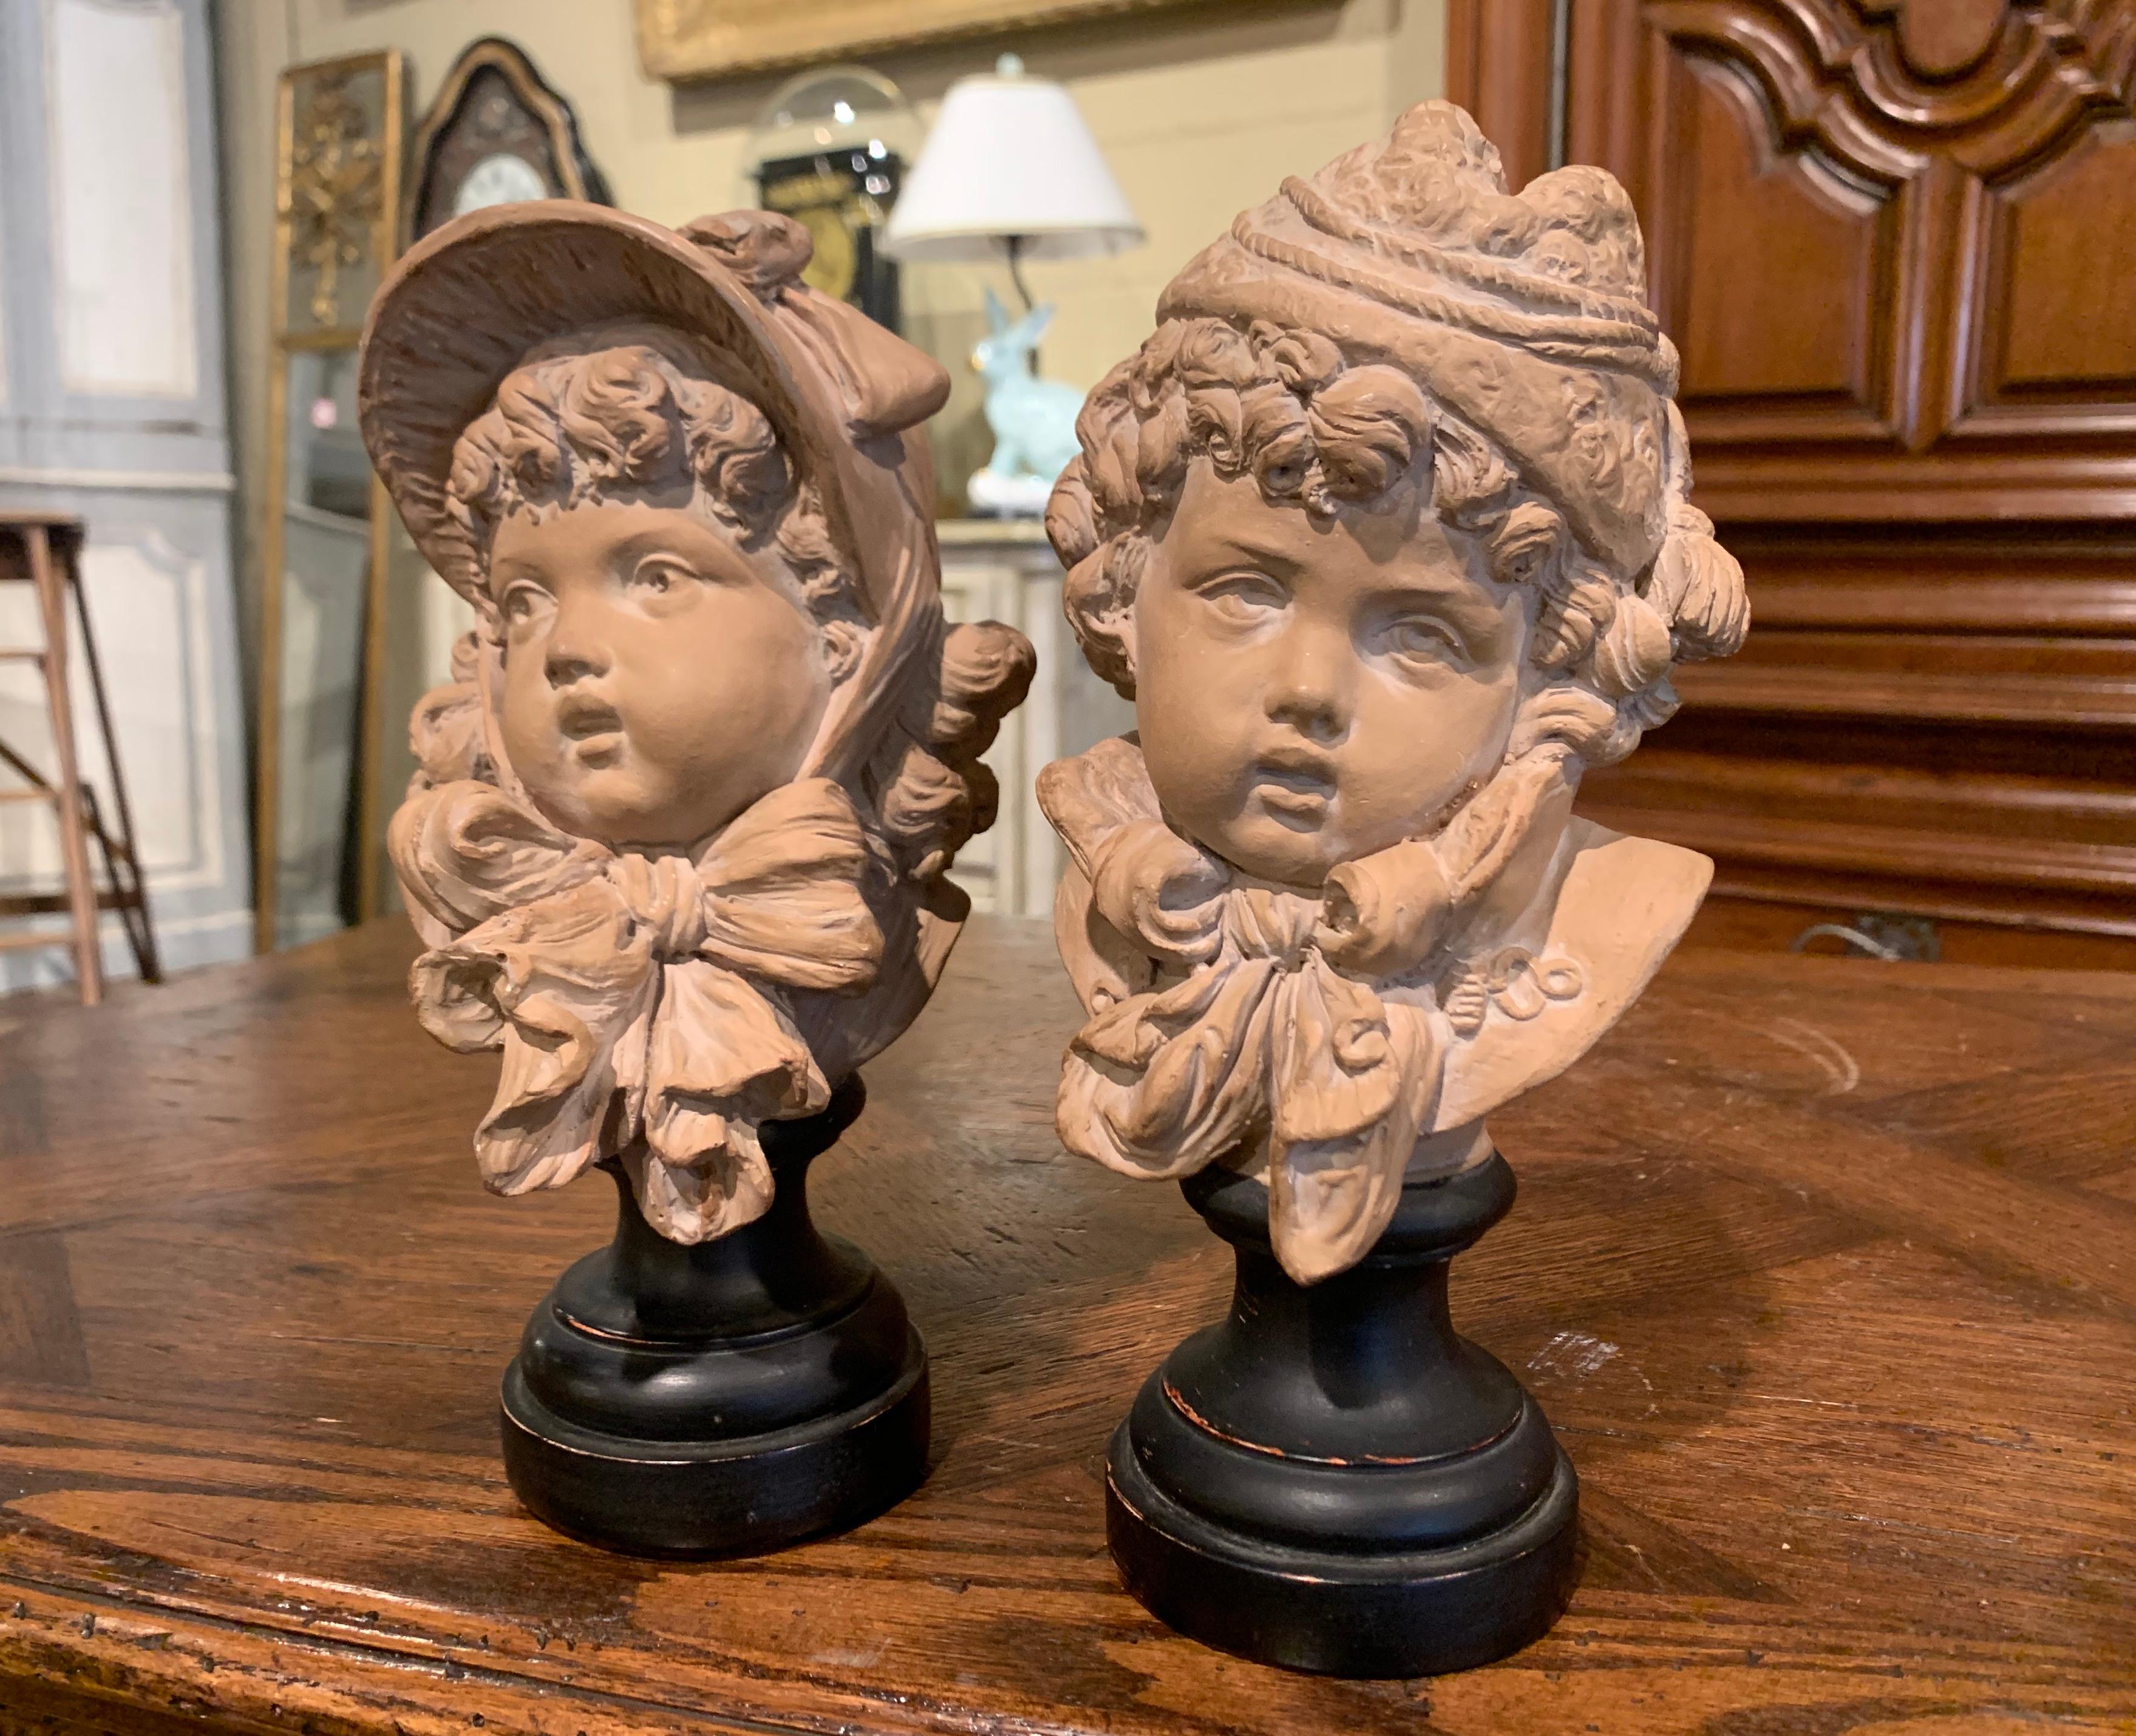 Decorate an office shelf with this cheerful pair of antique terracotta children busts. Crafted in Paris, France circa 1880, each subject features a child face sculpture standing on a black painted socle base. Each figure has wonderful facial